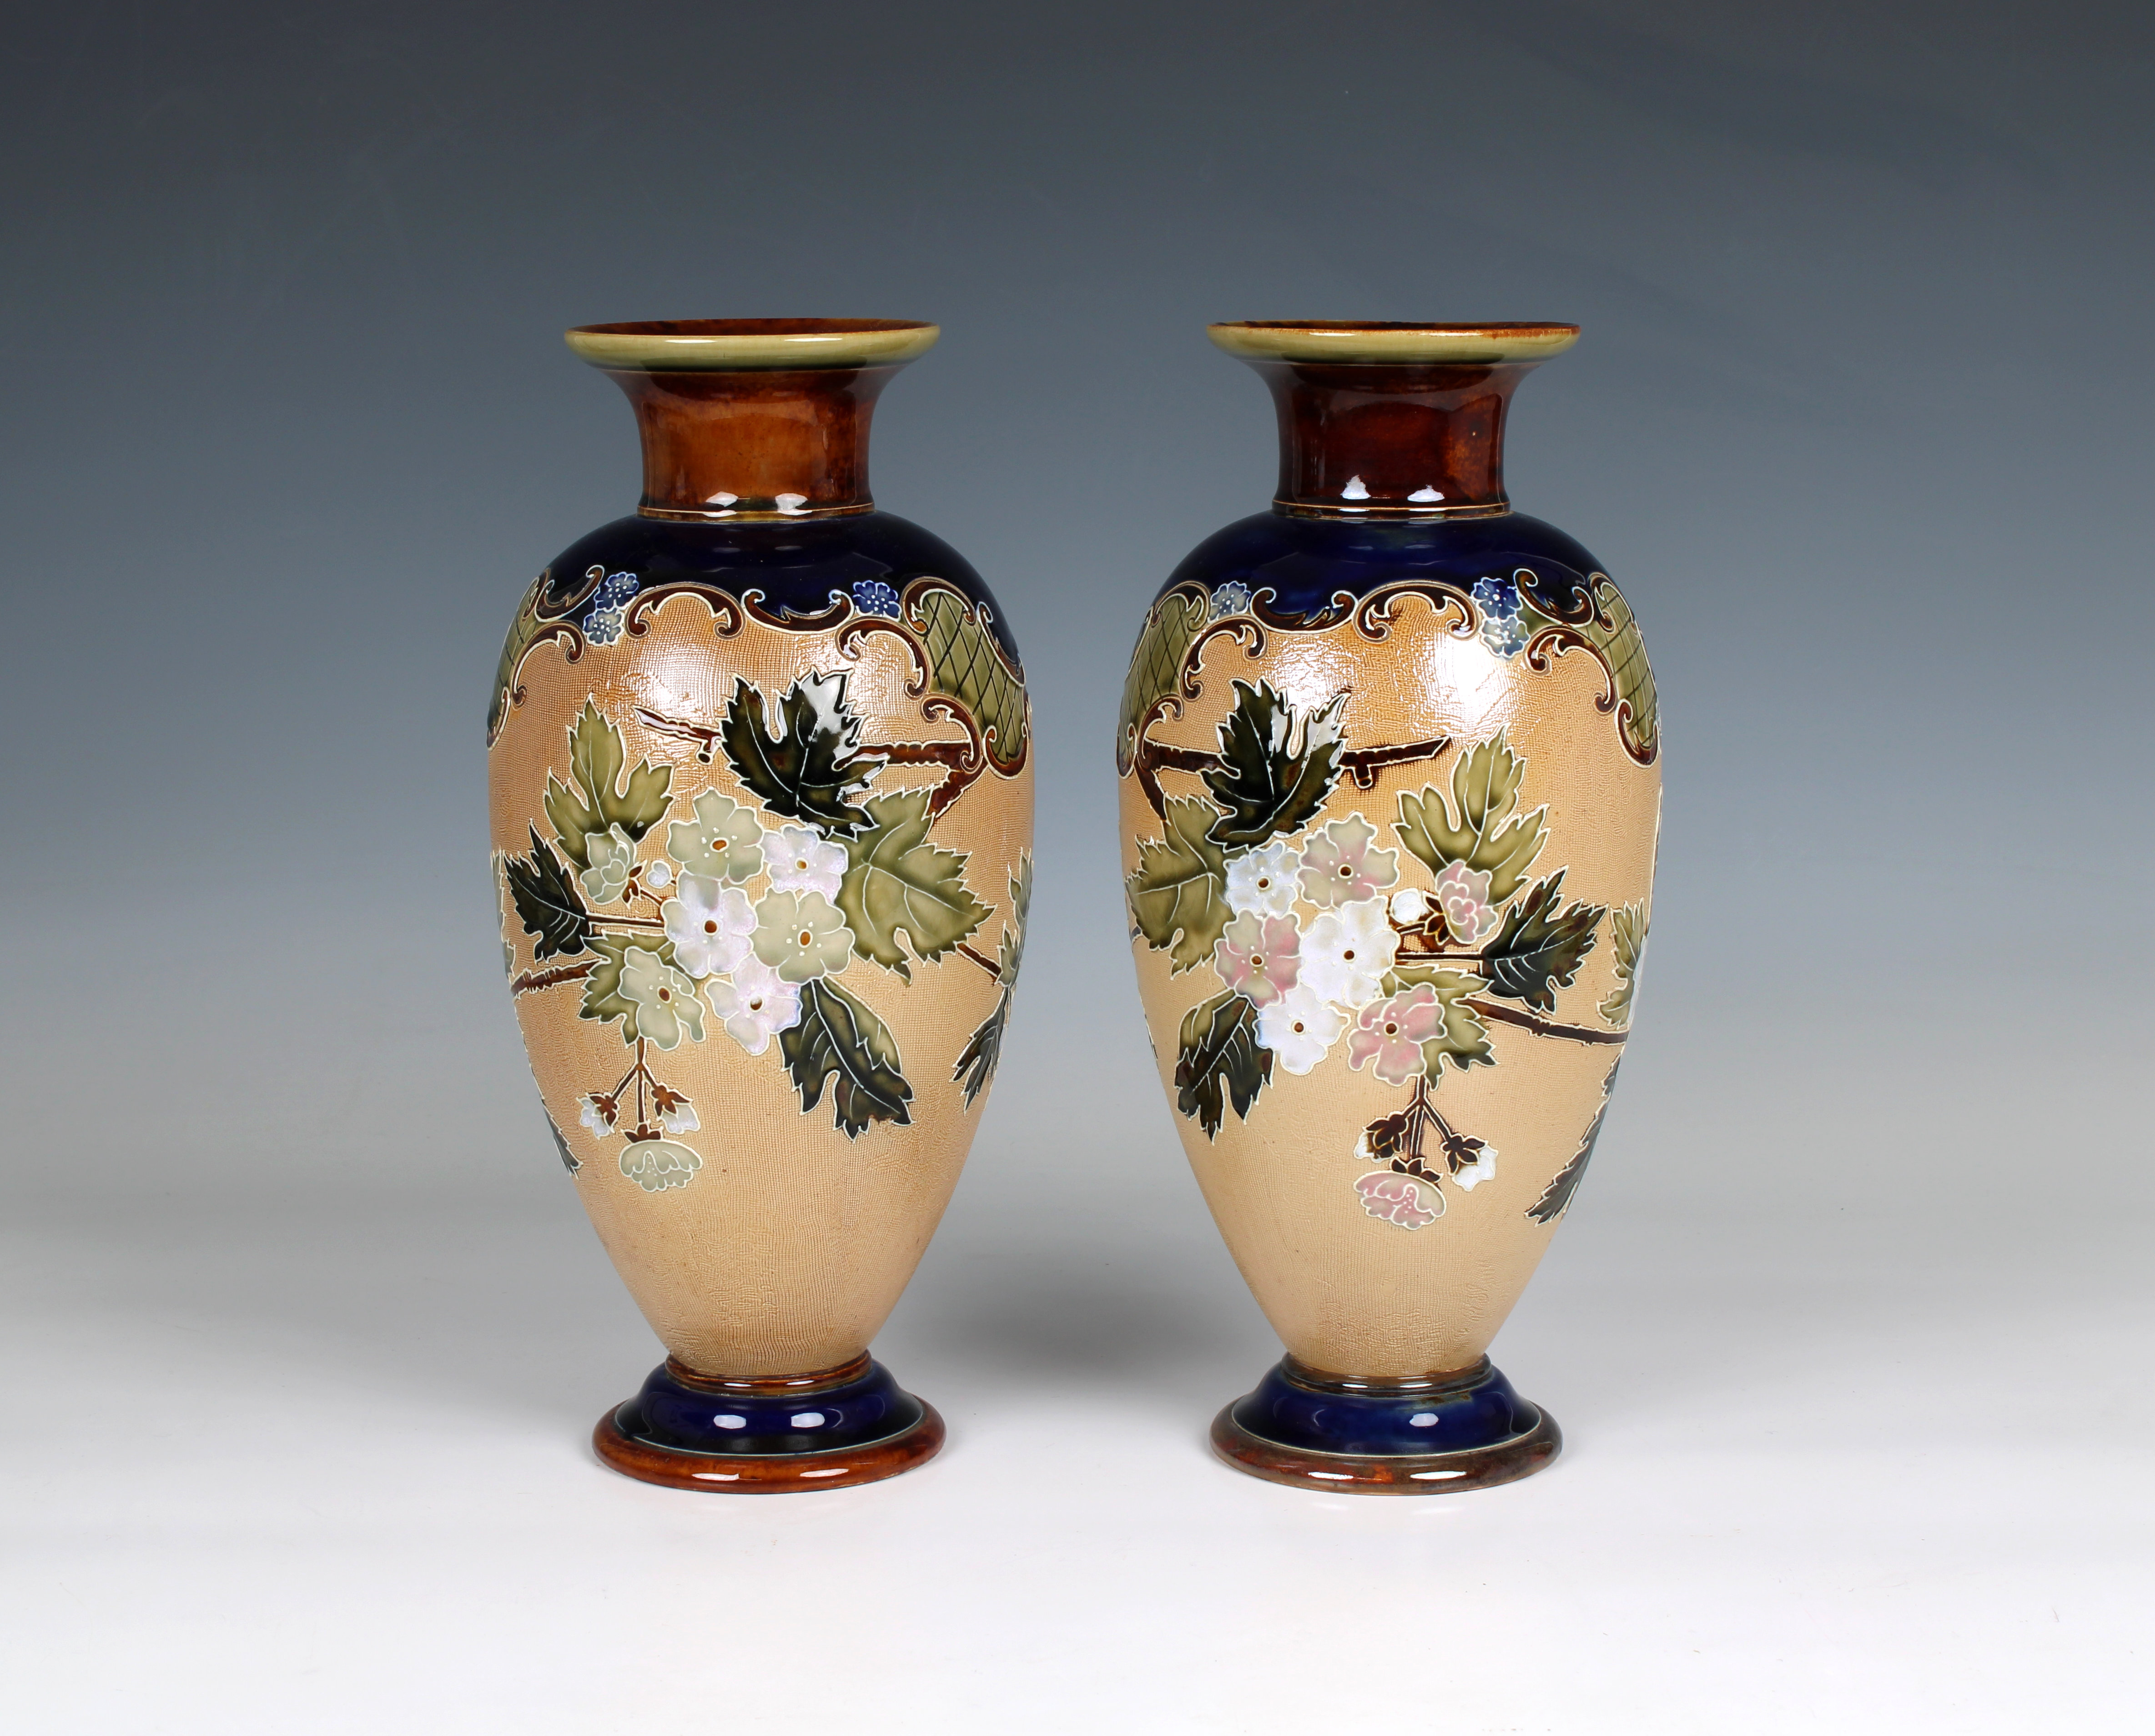 A matched pair of Doulton Lambeth Slater's Patent vases